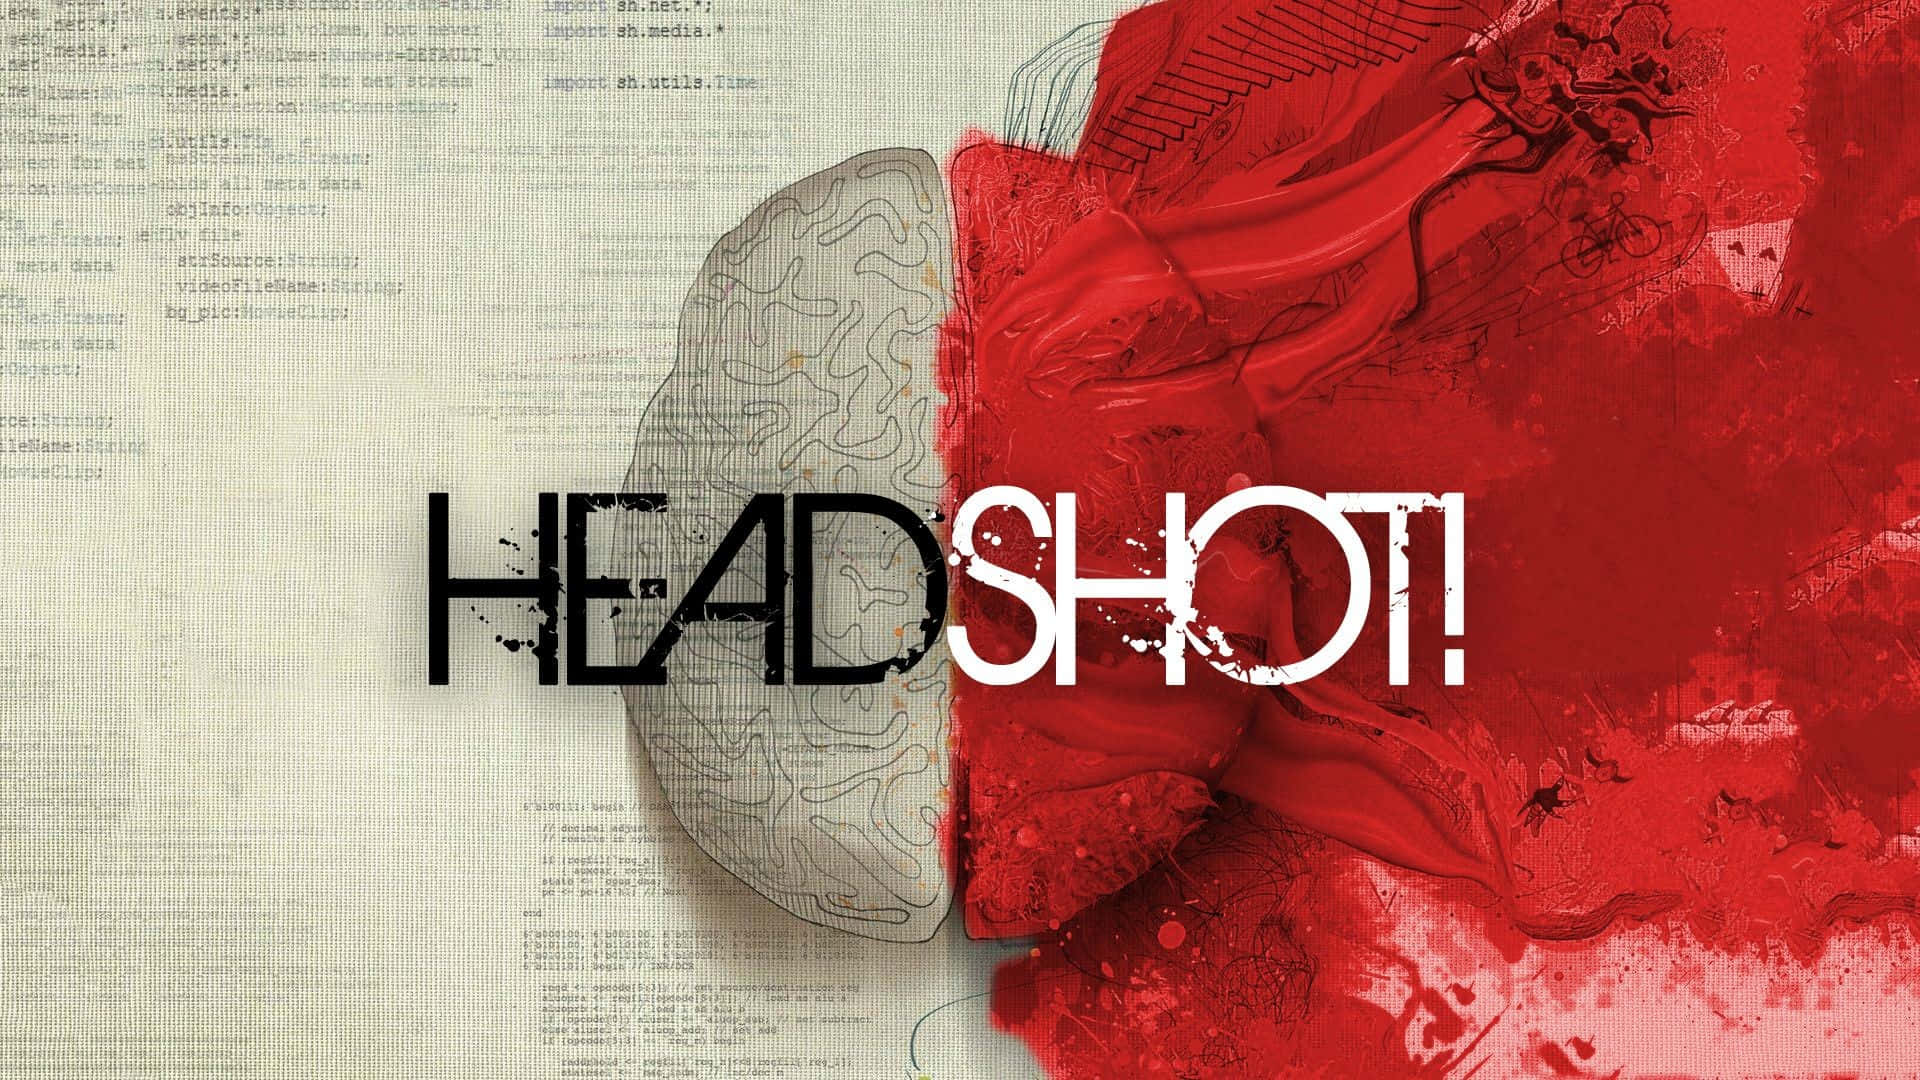 Headshot - A Brain With Red Paint On It Wallpaper